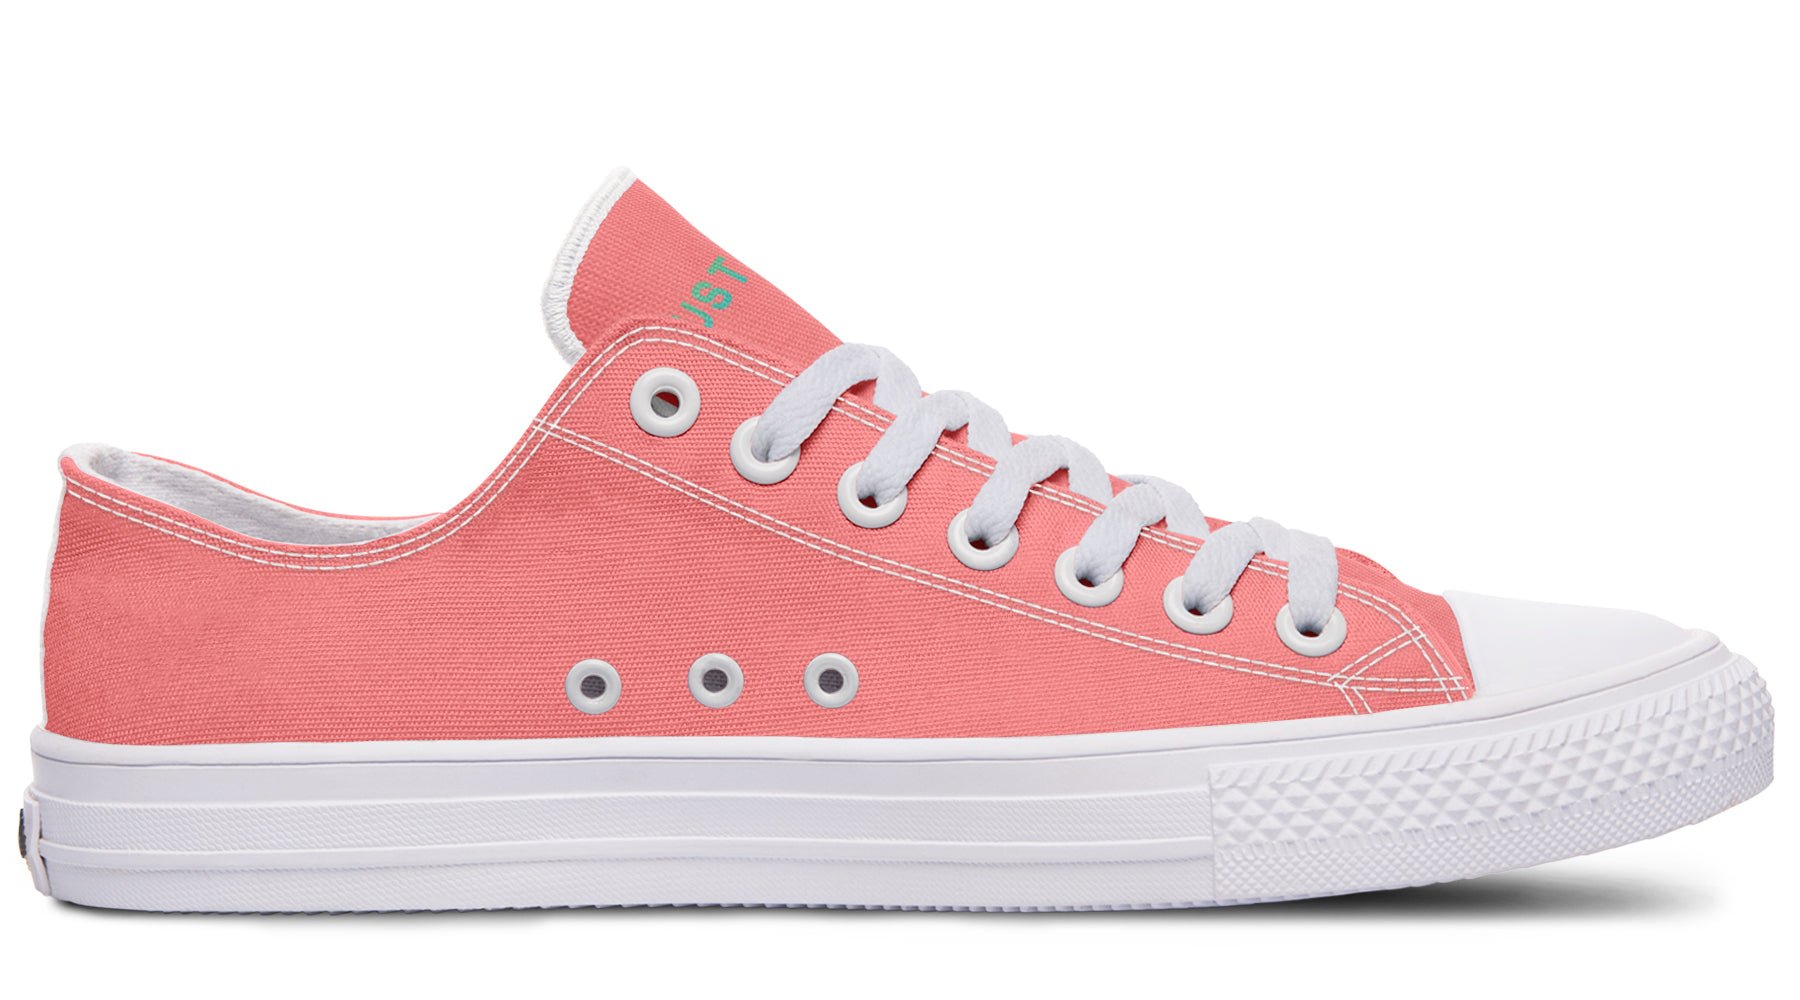 Unisex Low Tops Candyfloss Pink